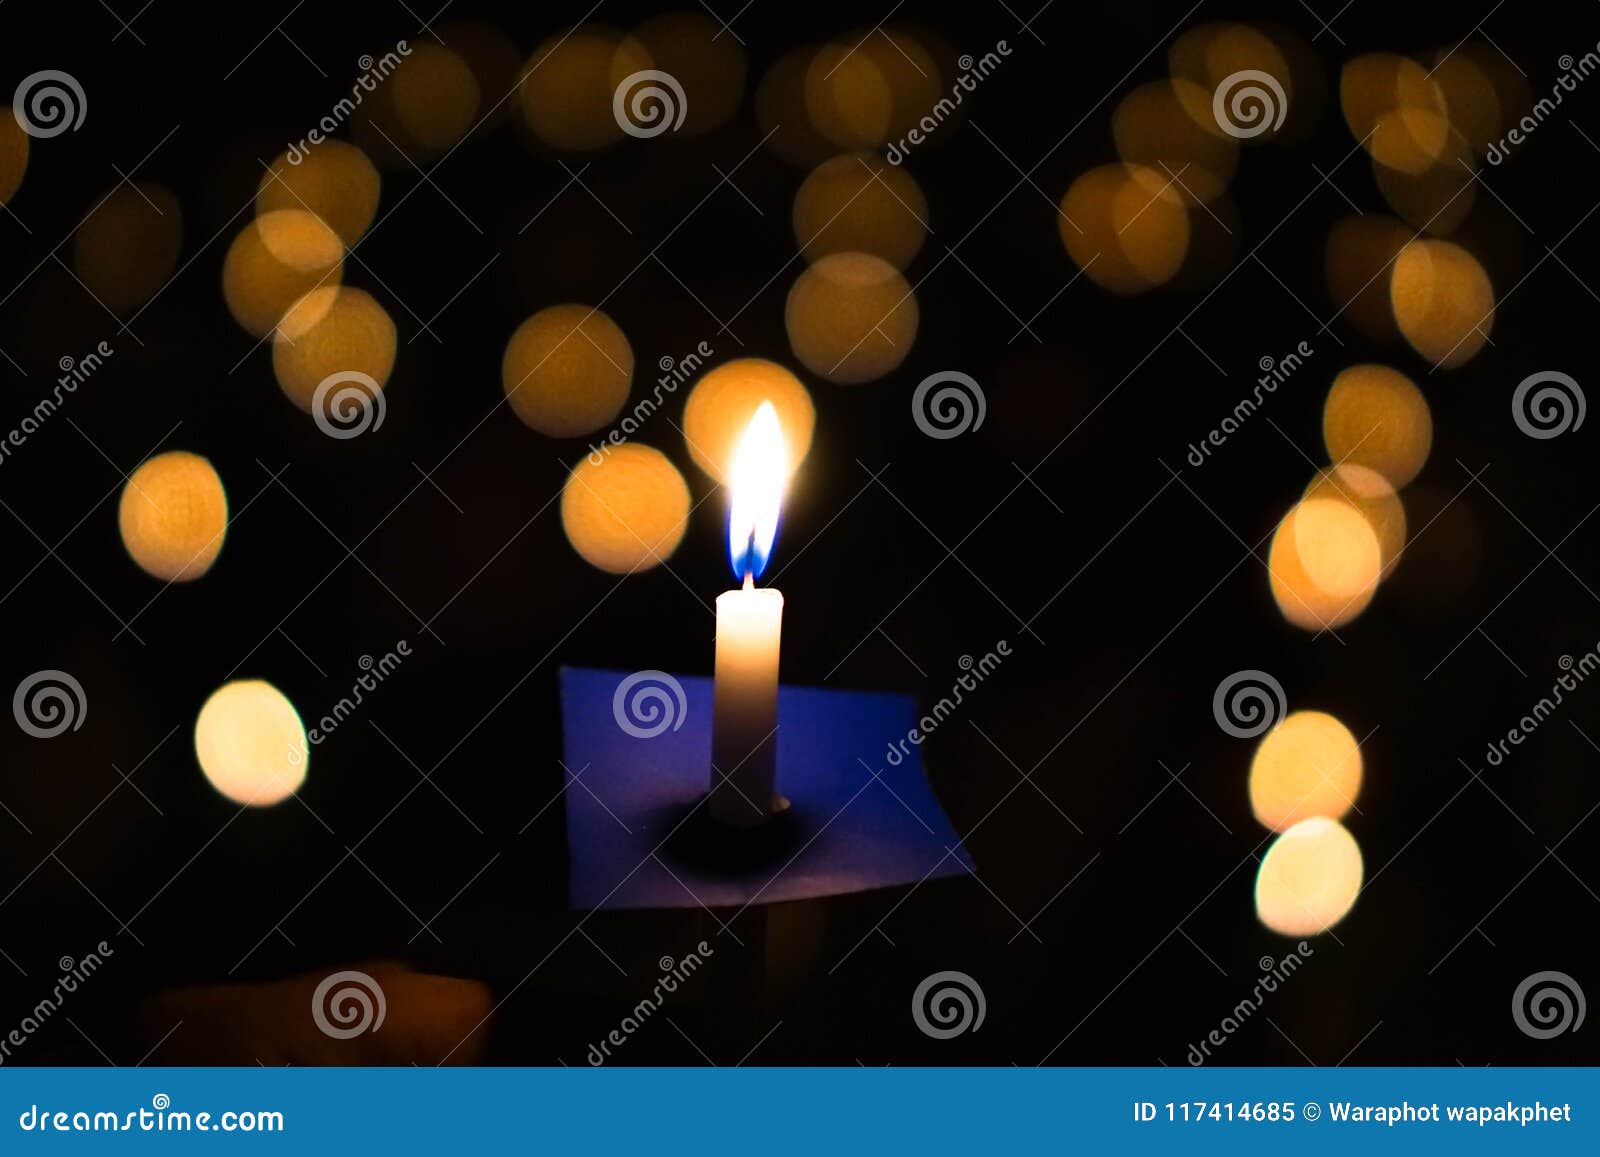 candle flame at night with bokeh on dark background with go light blessed is the light of holiness and miracles.